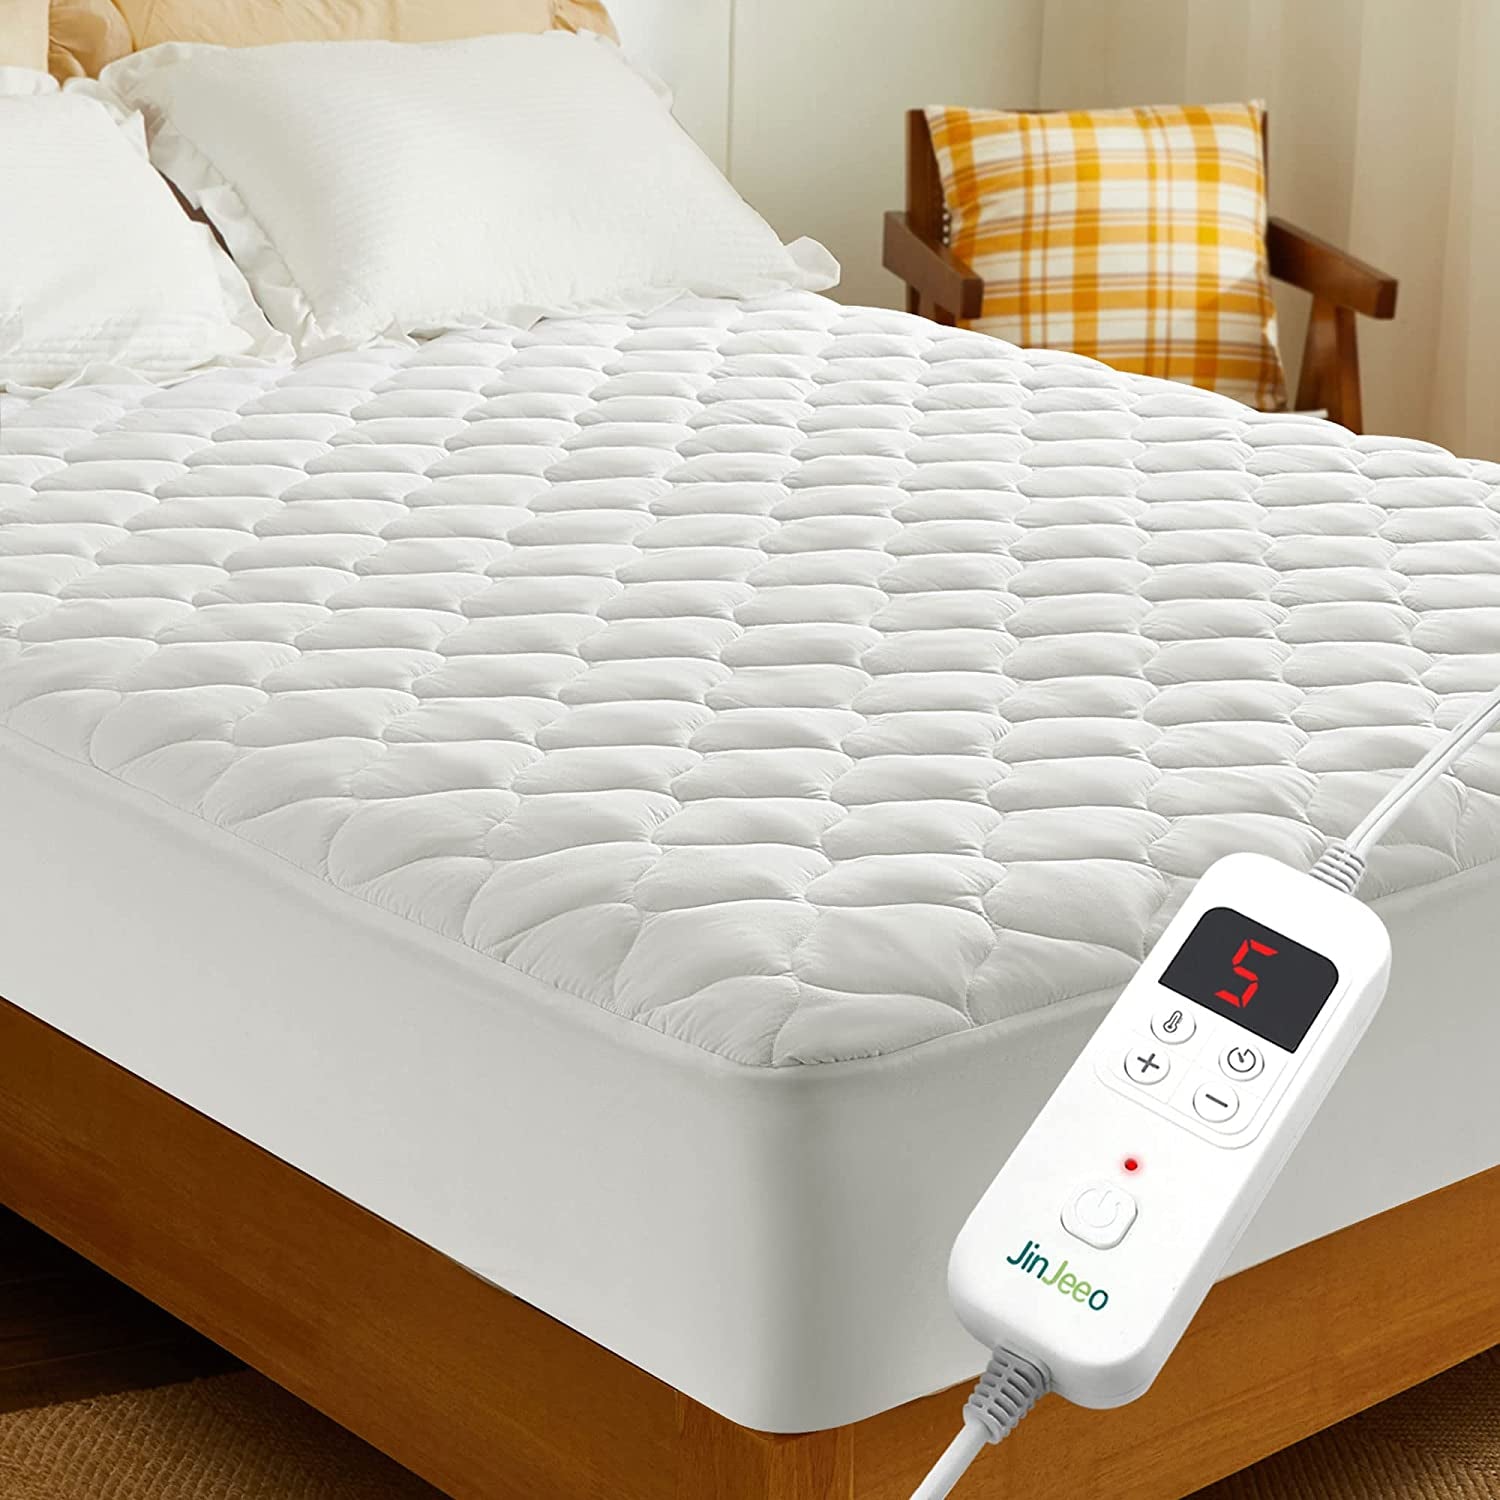 Heated Mattress Pad Twin Size Electric Mattress Pads Electric Bed Warmer Fit up to 21" with 11 Heat Settings Single Controller 9 Hours Auto Shut Off